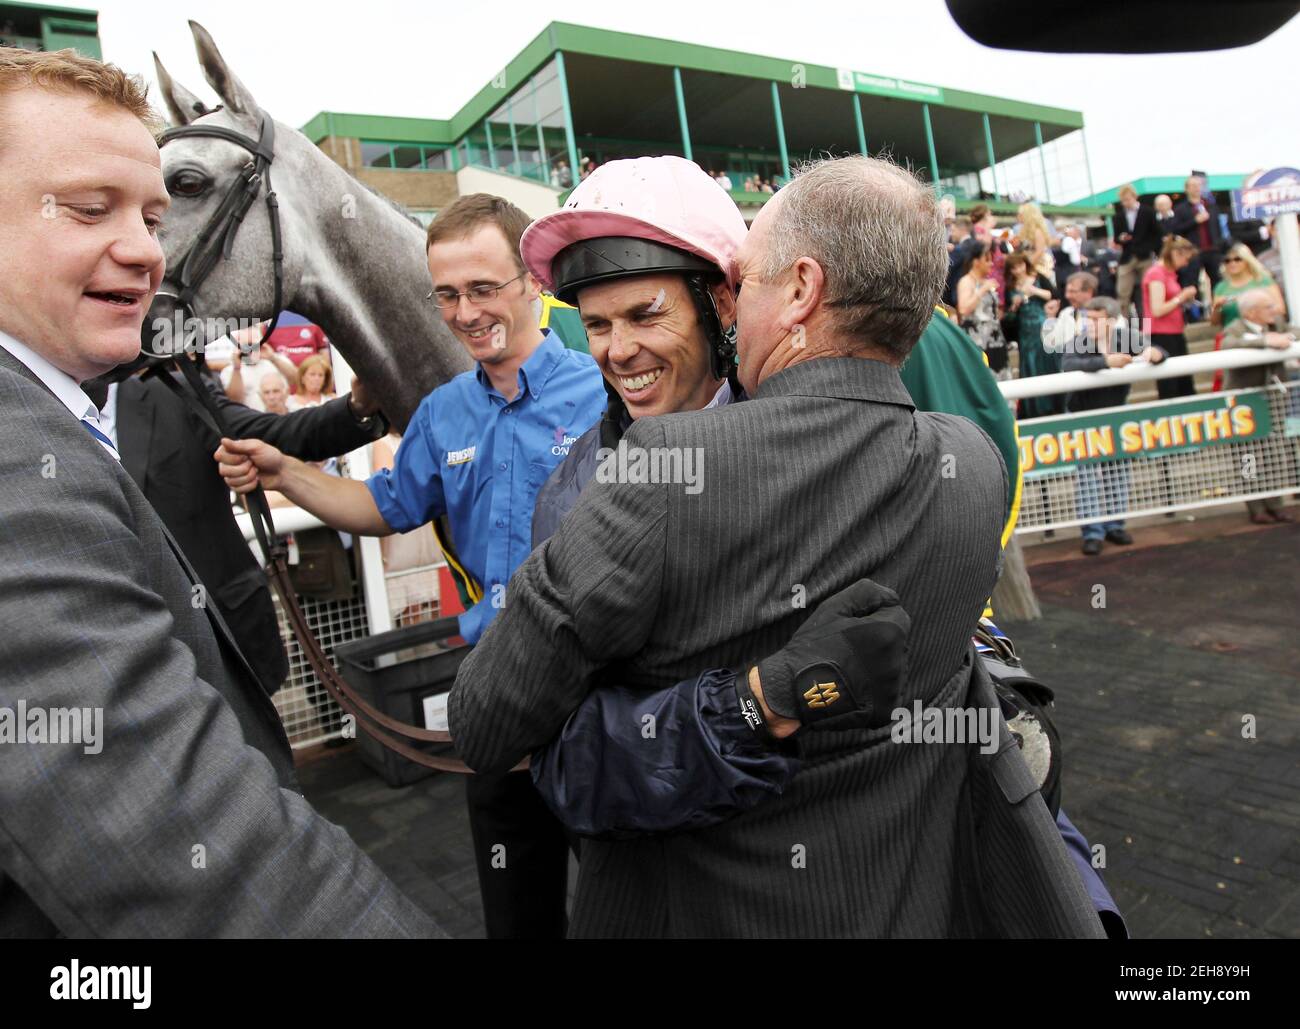 Horse Racing - Northumberland Plate - Newcastle Racecourse - 29/6/13  Trainer Jonjo O'Neill (R) and jockey Graham Lee celebrate after winning the 15.15 The John Smiths Northumberland Plate with Tominator  Mandatory Credit: Action Images / Ed Sykes  Livepic Stock Photo